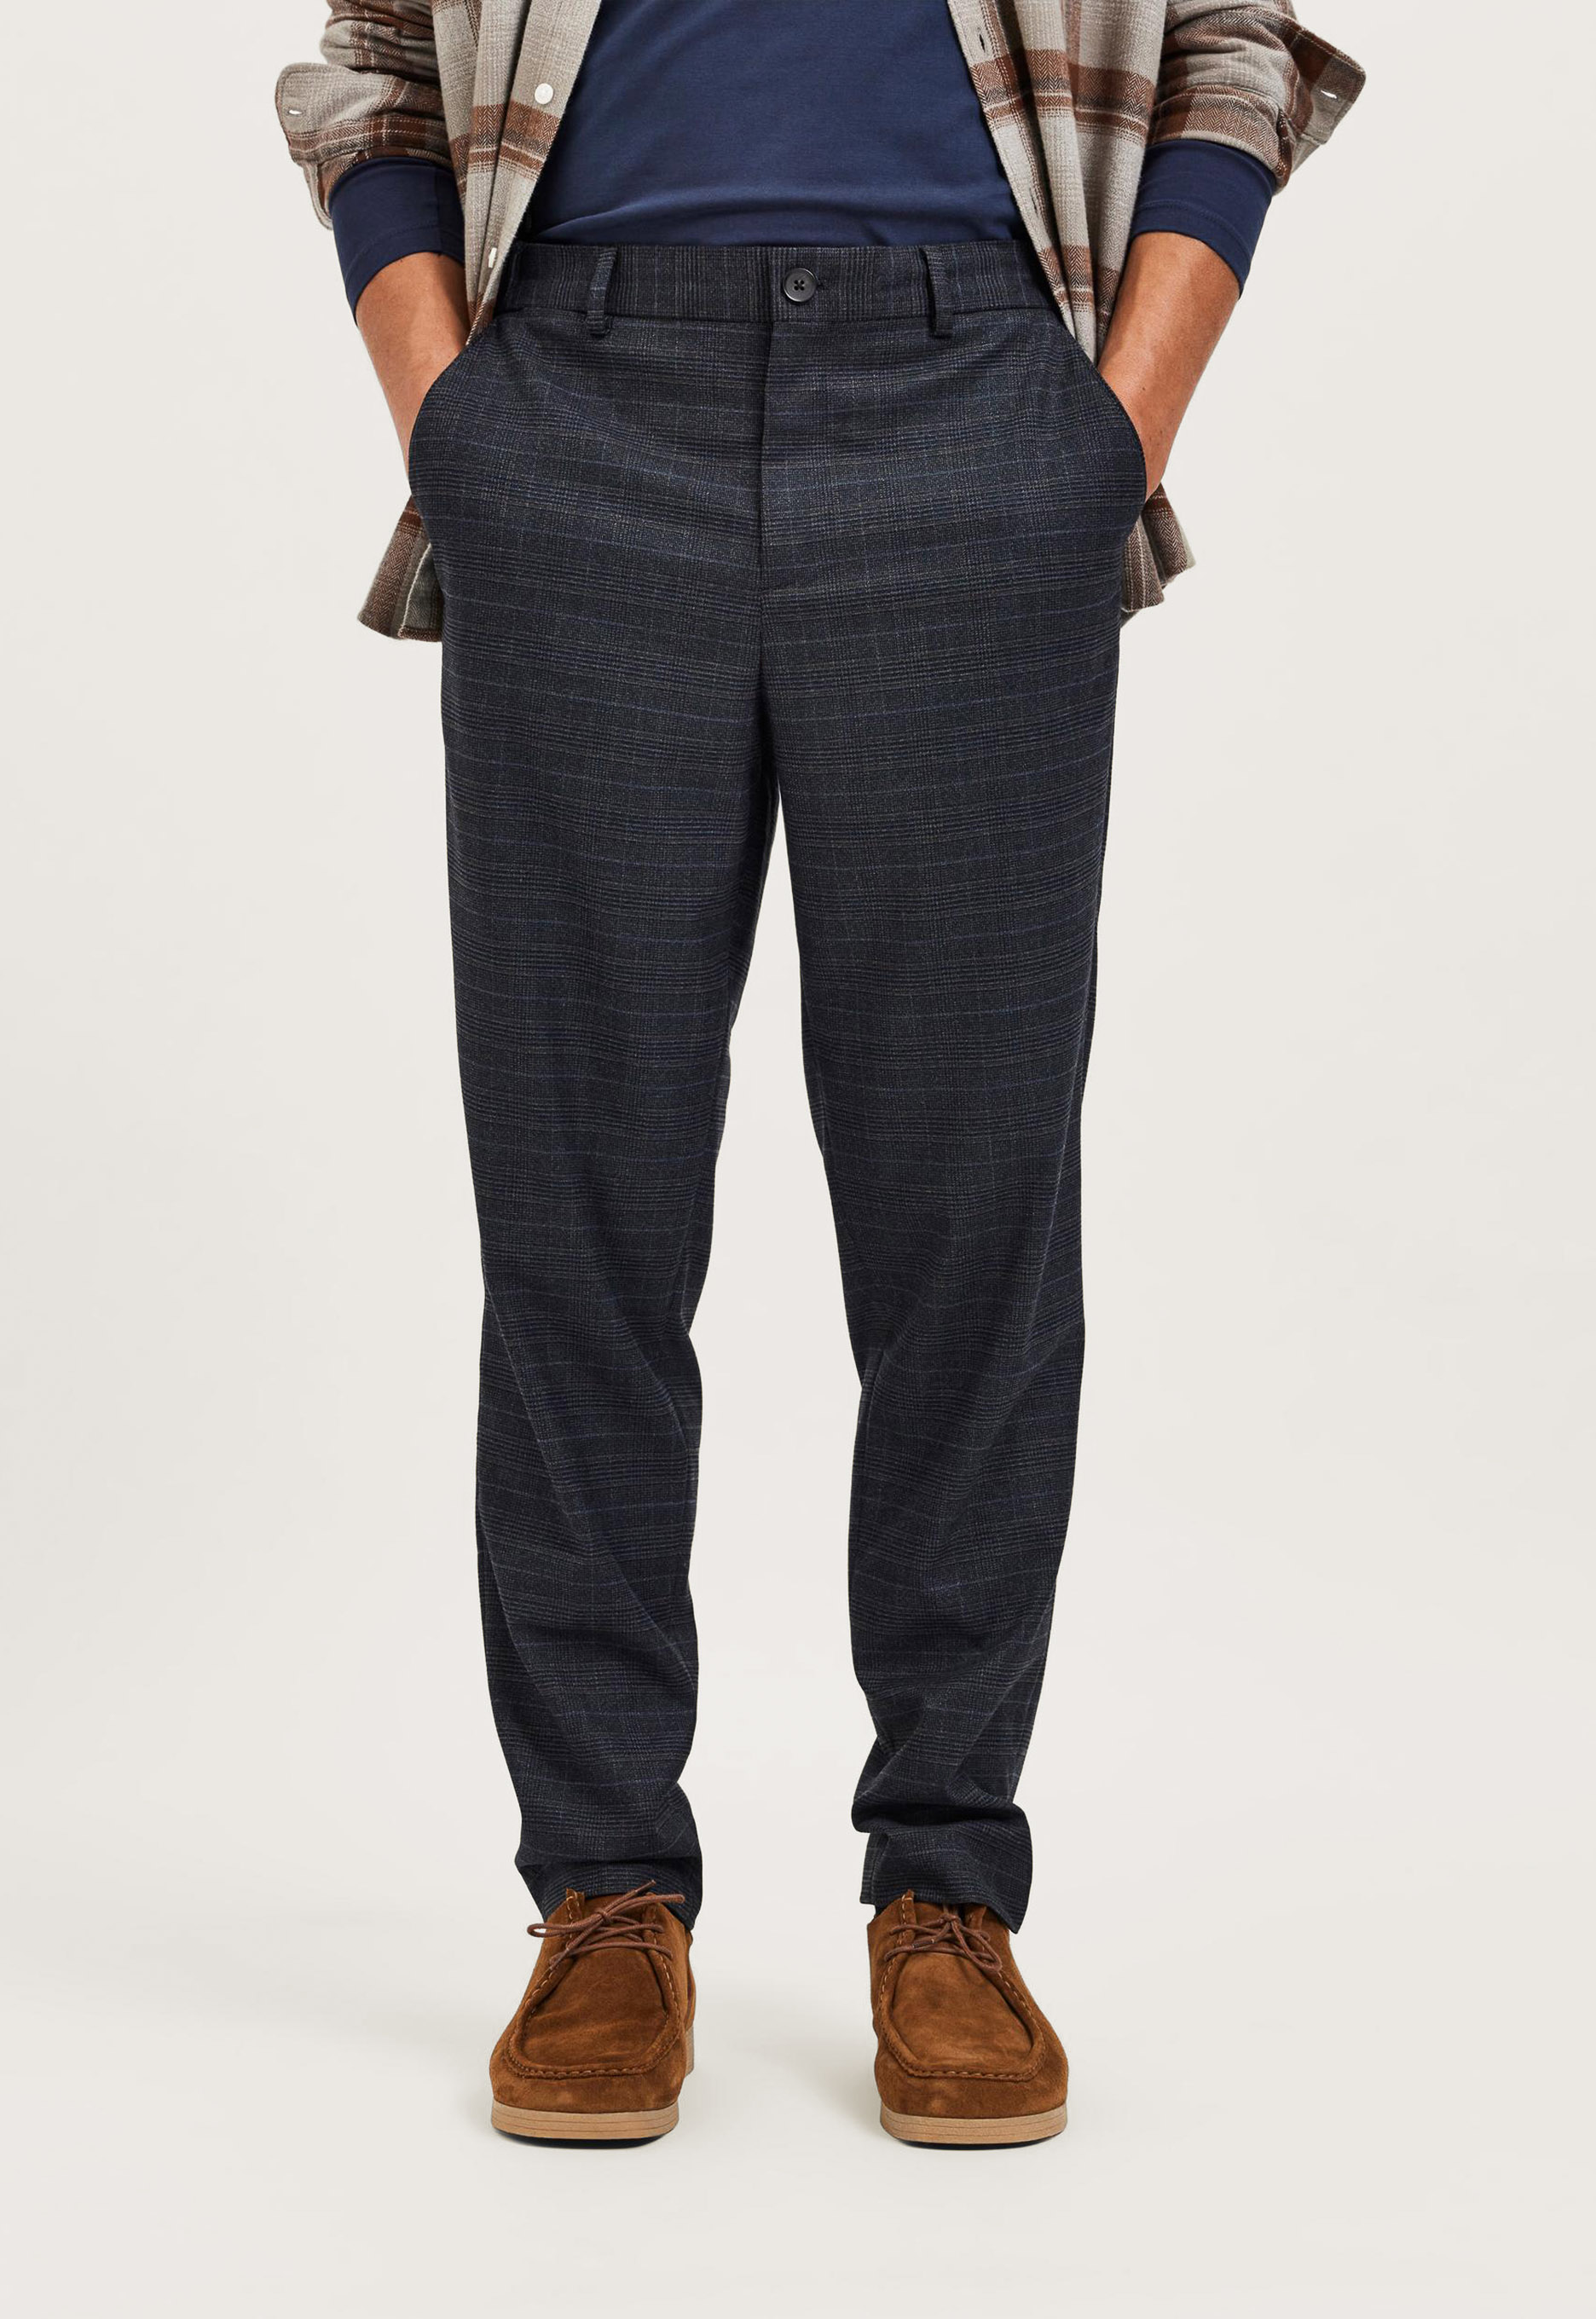 Selected Homme 16086553 Slim tape marlow mix pant